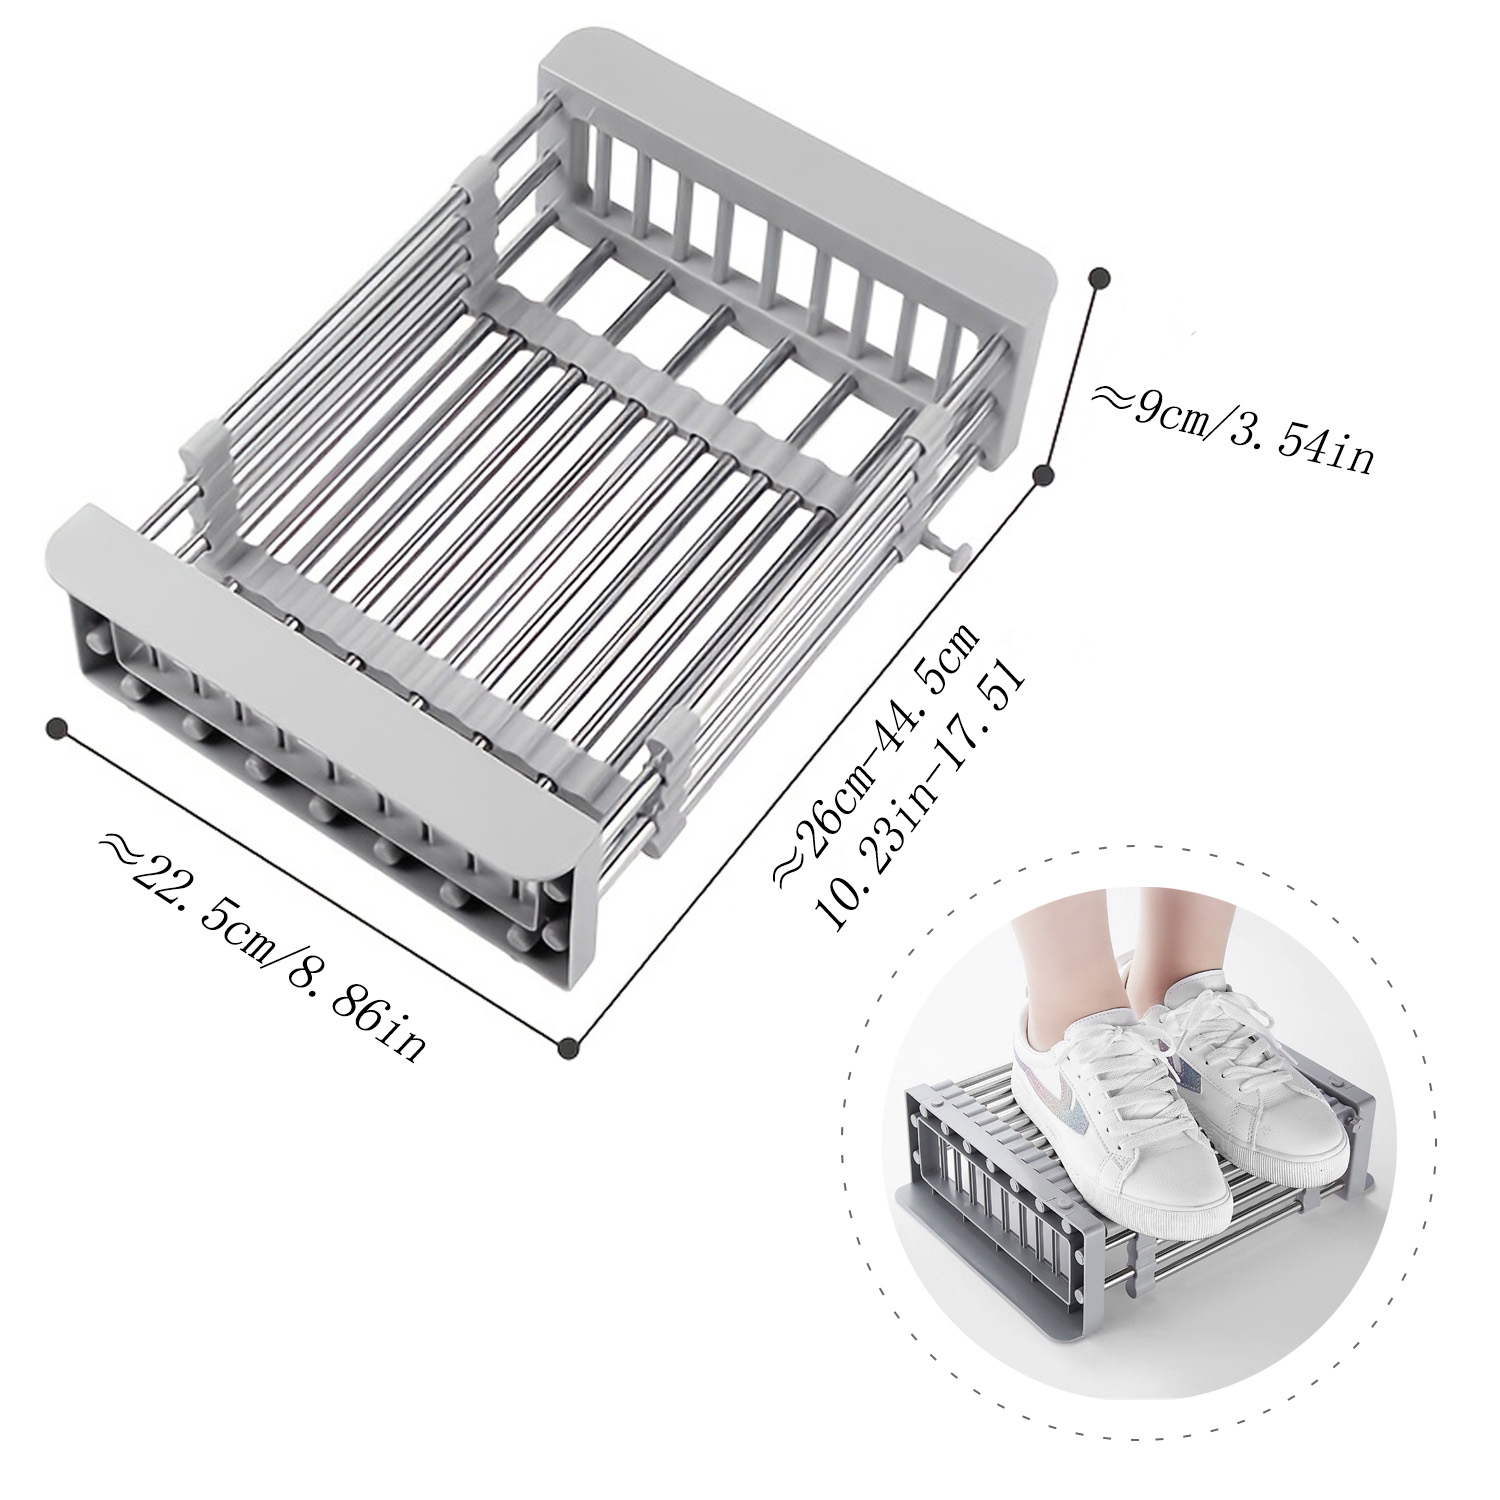 Telescopic Drain Basket with Adjustable Armrest Kitchen Rack Drain Basket Over The Sink Dish Drying Rack Retractable Stainless Steel Sink Strainer Drain